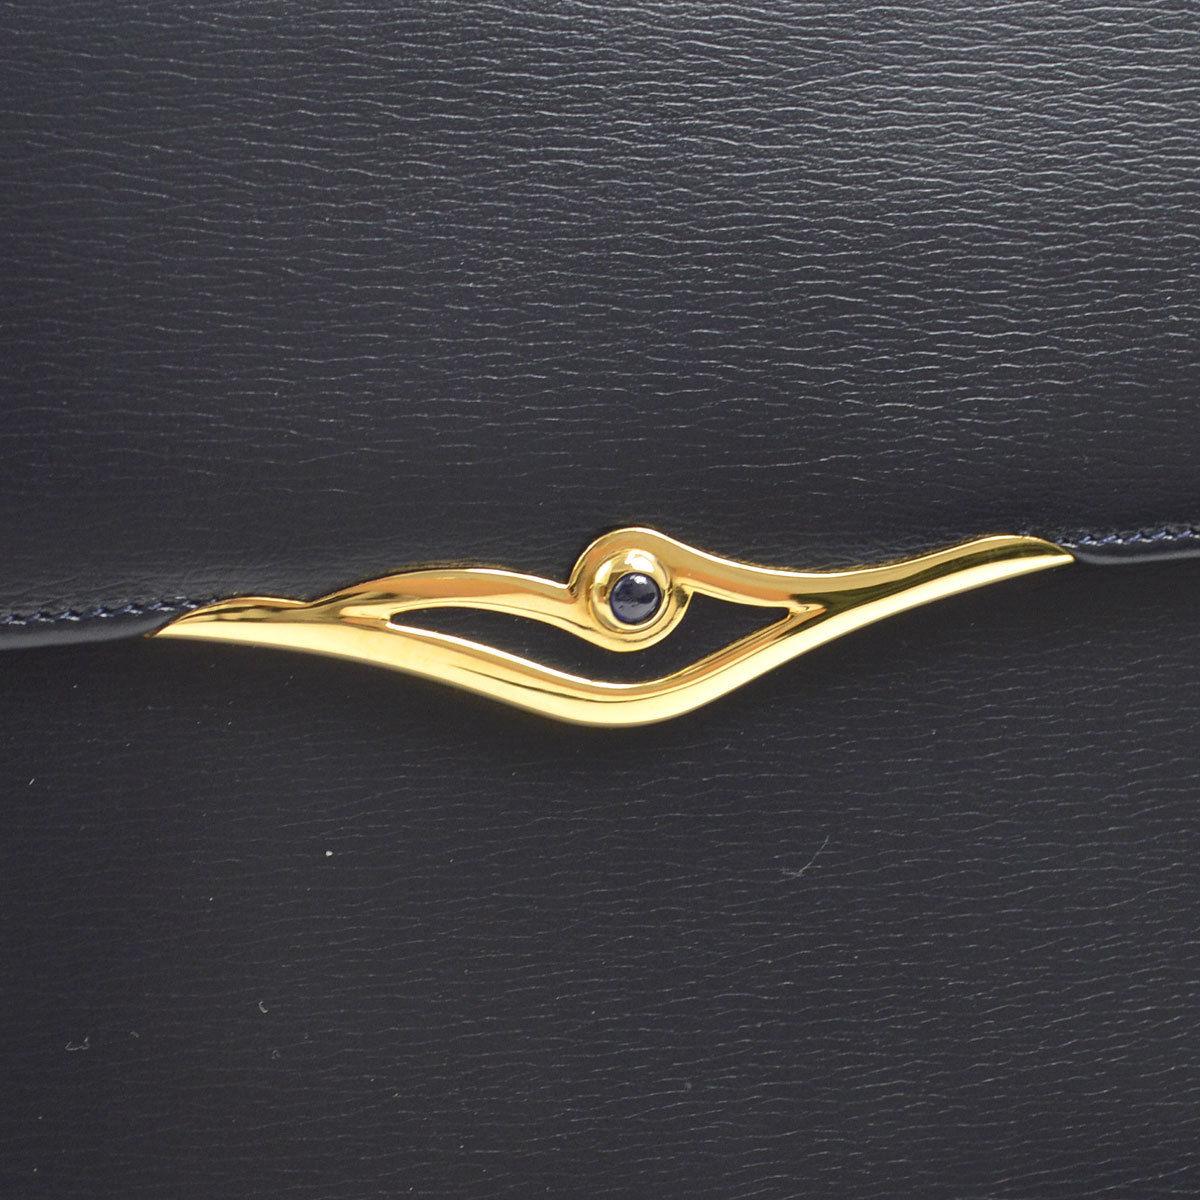 Cartier Dark Midnight Blue Leather Gold Emblem Envelope Evening Clutch Flap Bag

Leather
Gold tone hardware
Snap closure
Woven lining
Made in France
Measures 8.25